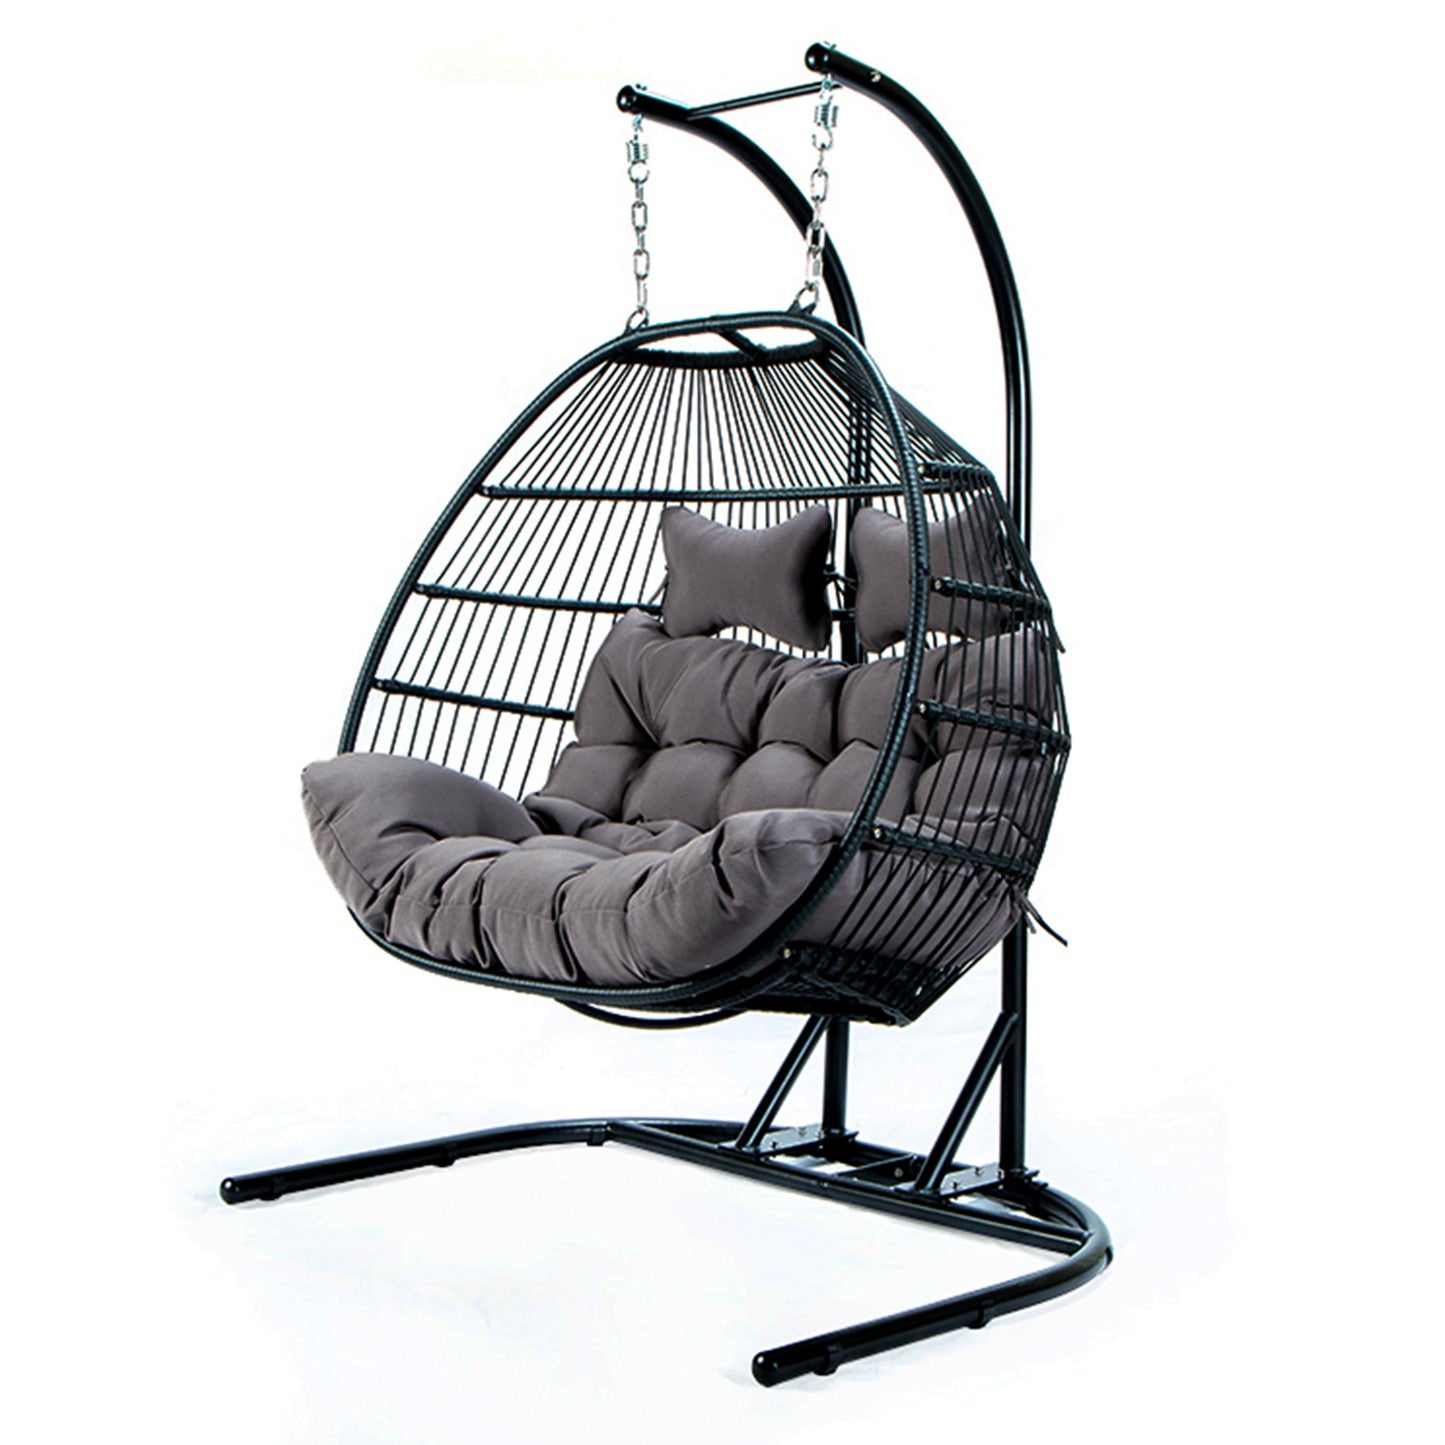 Folding Double Seat Swing Chair With Cushion